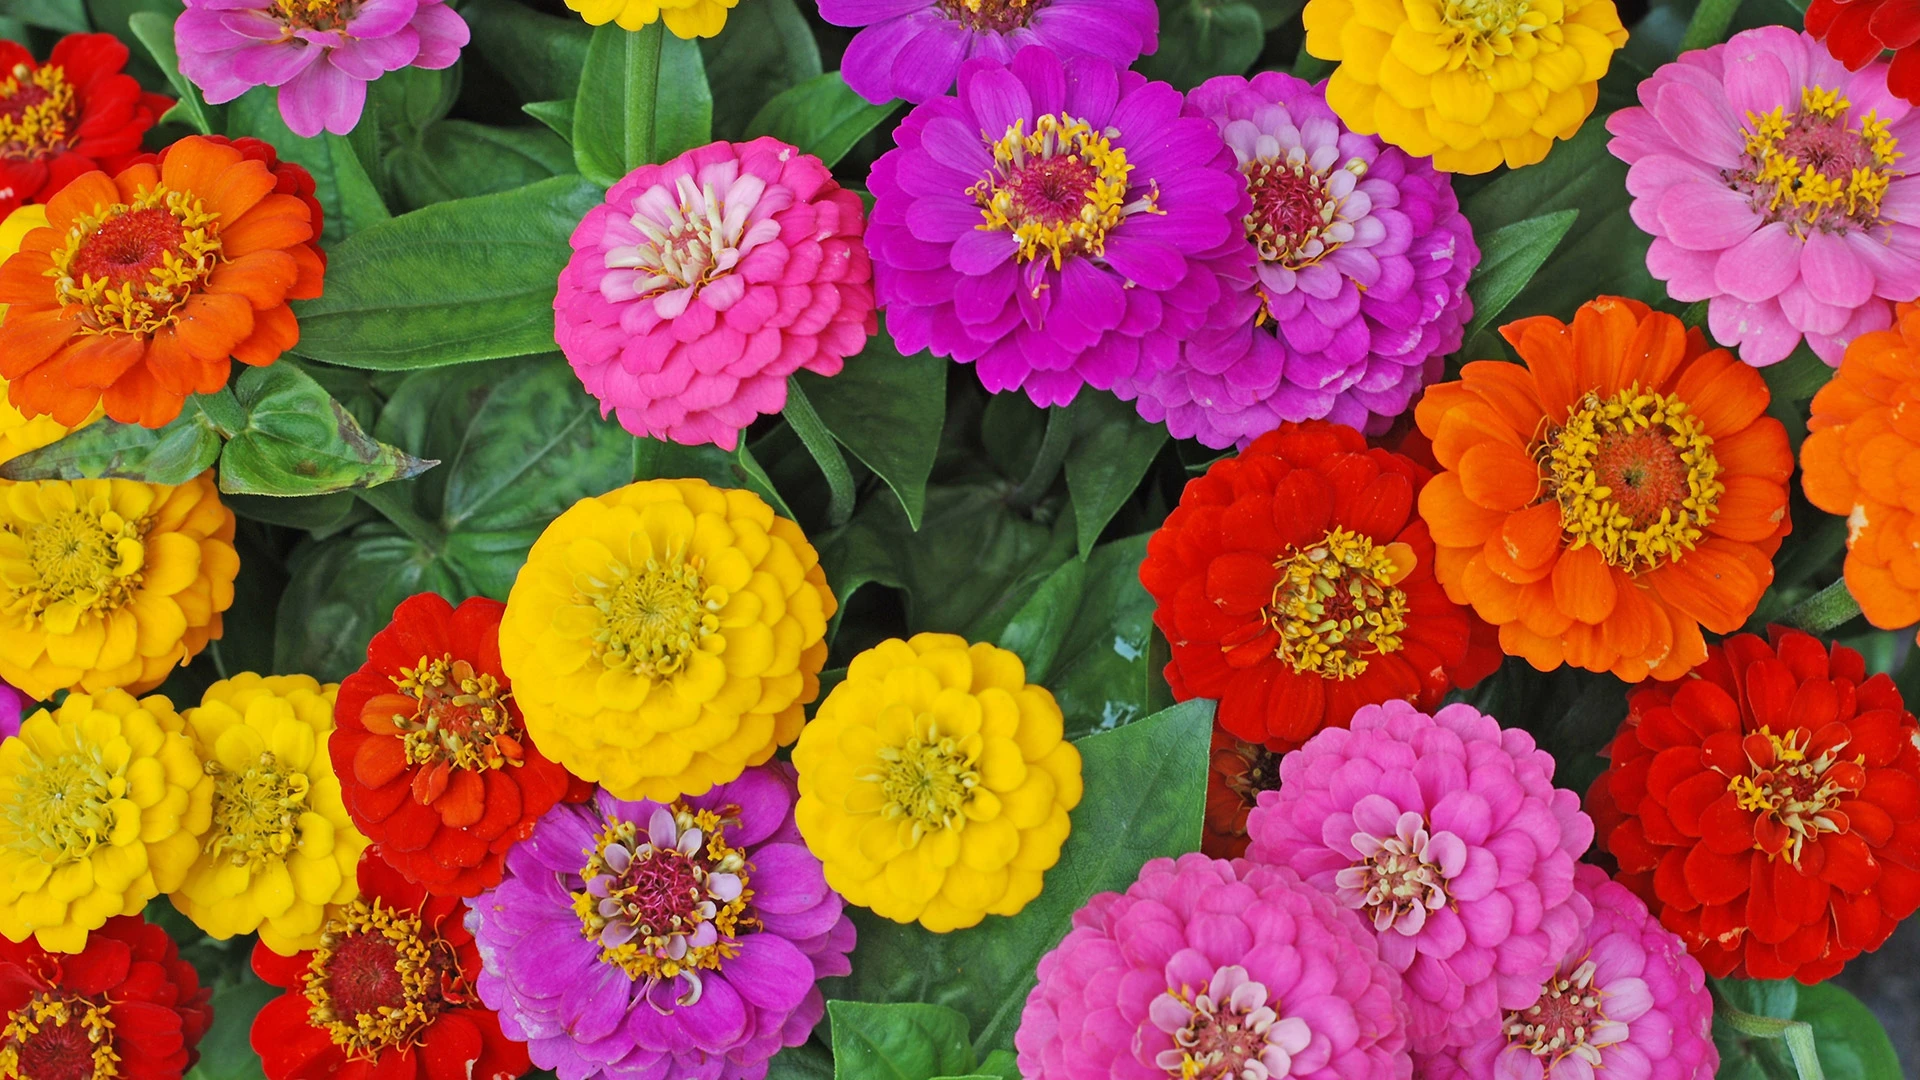 4 Annual Flowers to Plant in Your Garden This Spring